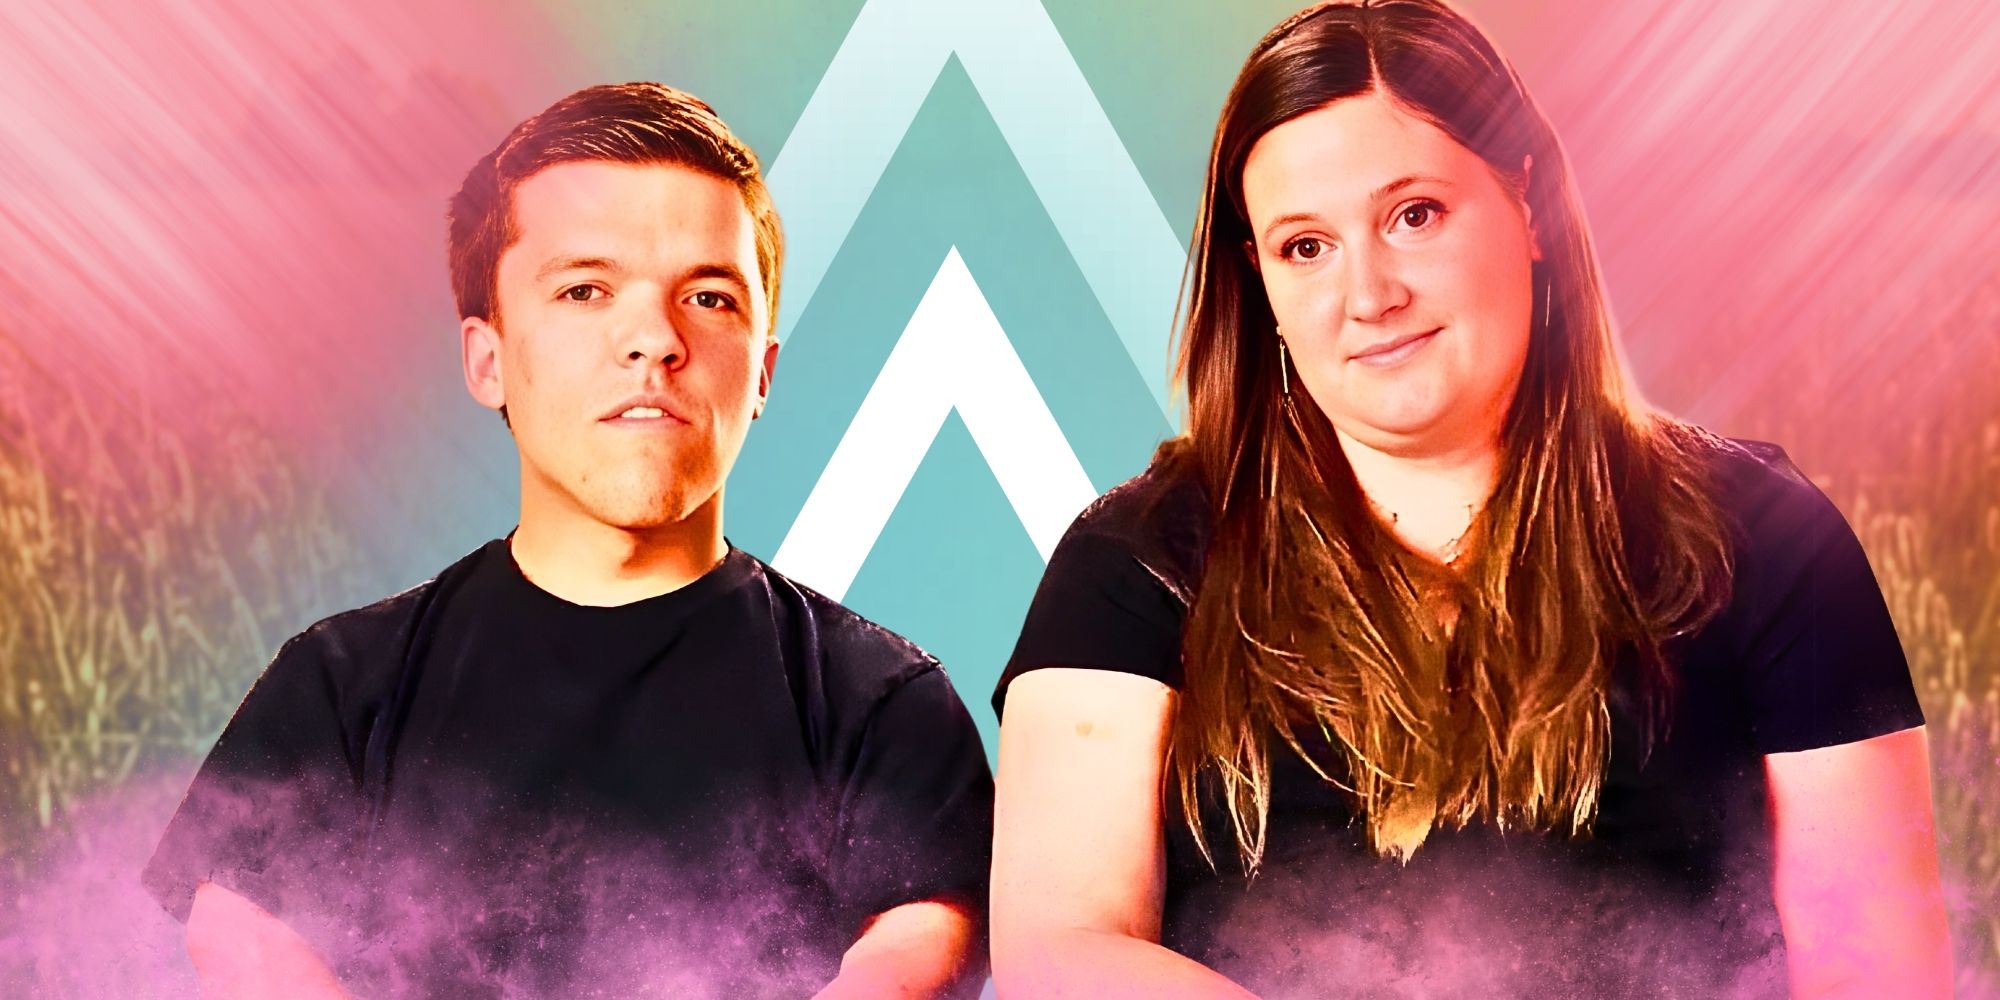 Little People, Big World's Zach & Tori Roloff looking serious during a confessional moment